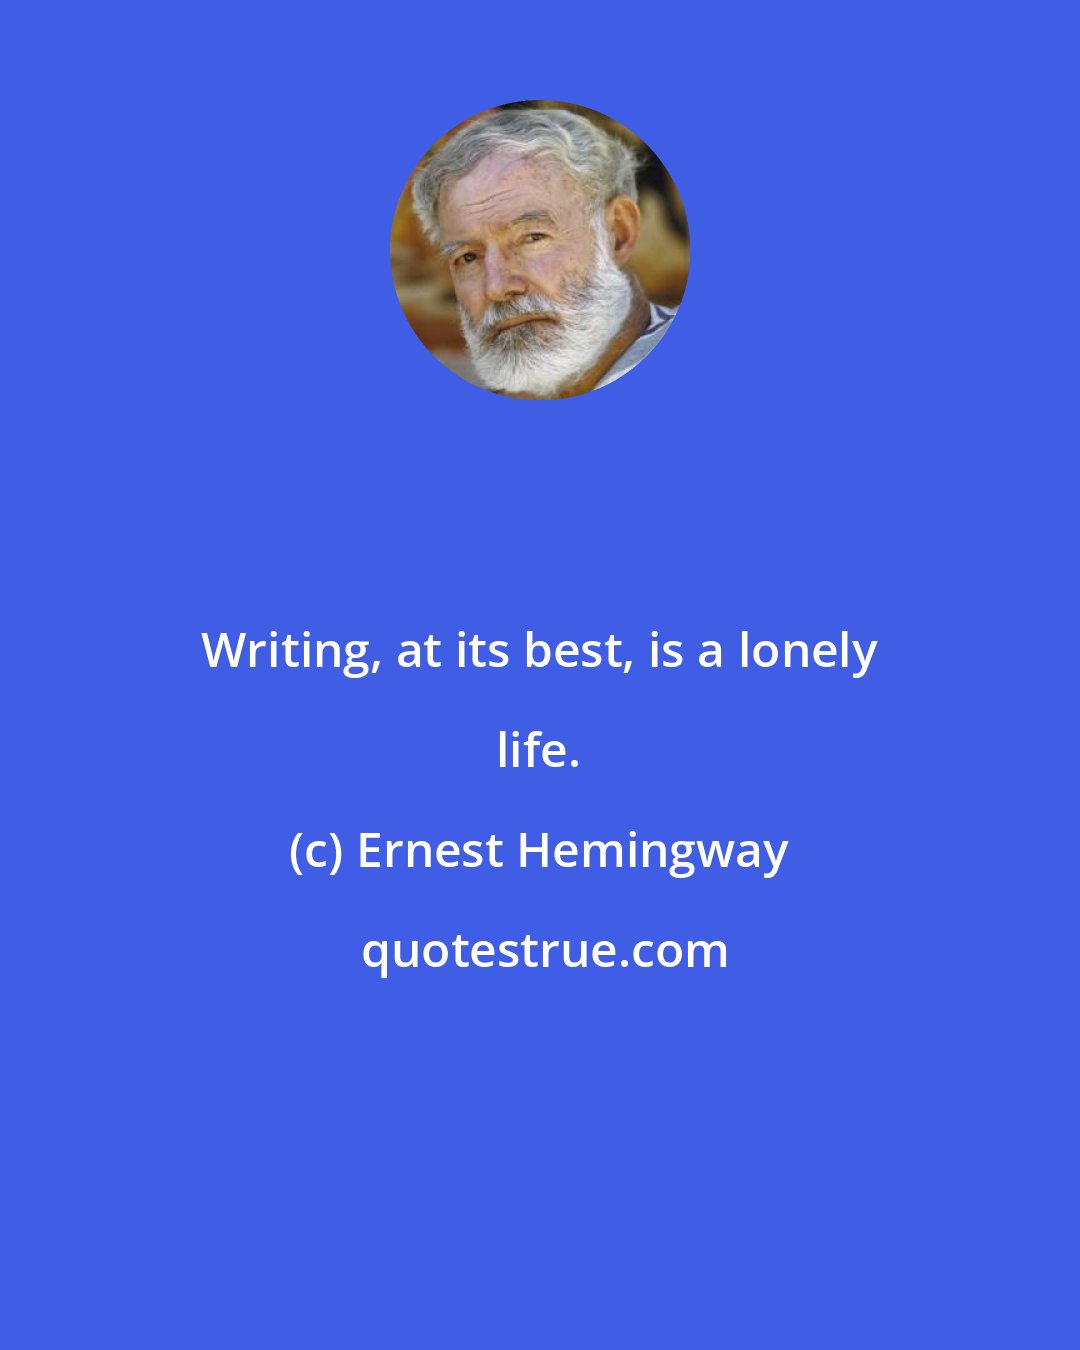 Ernest Hemingway: Writing, at its best, is a lonely life.